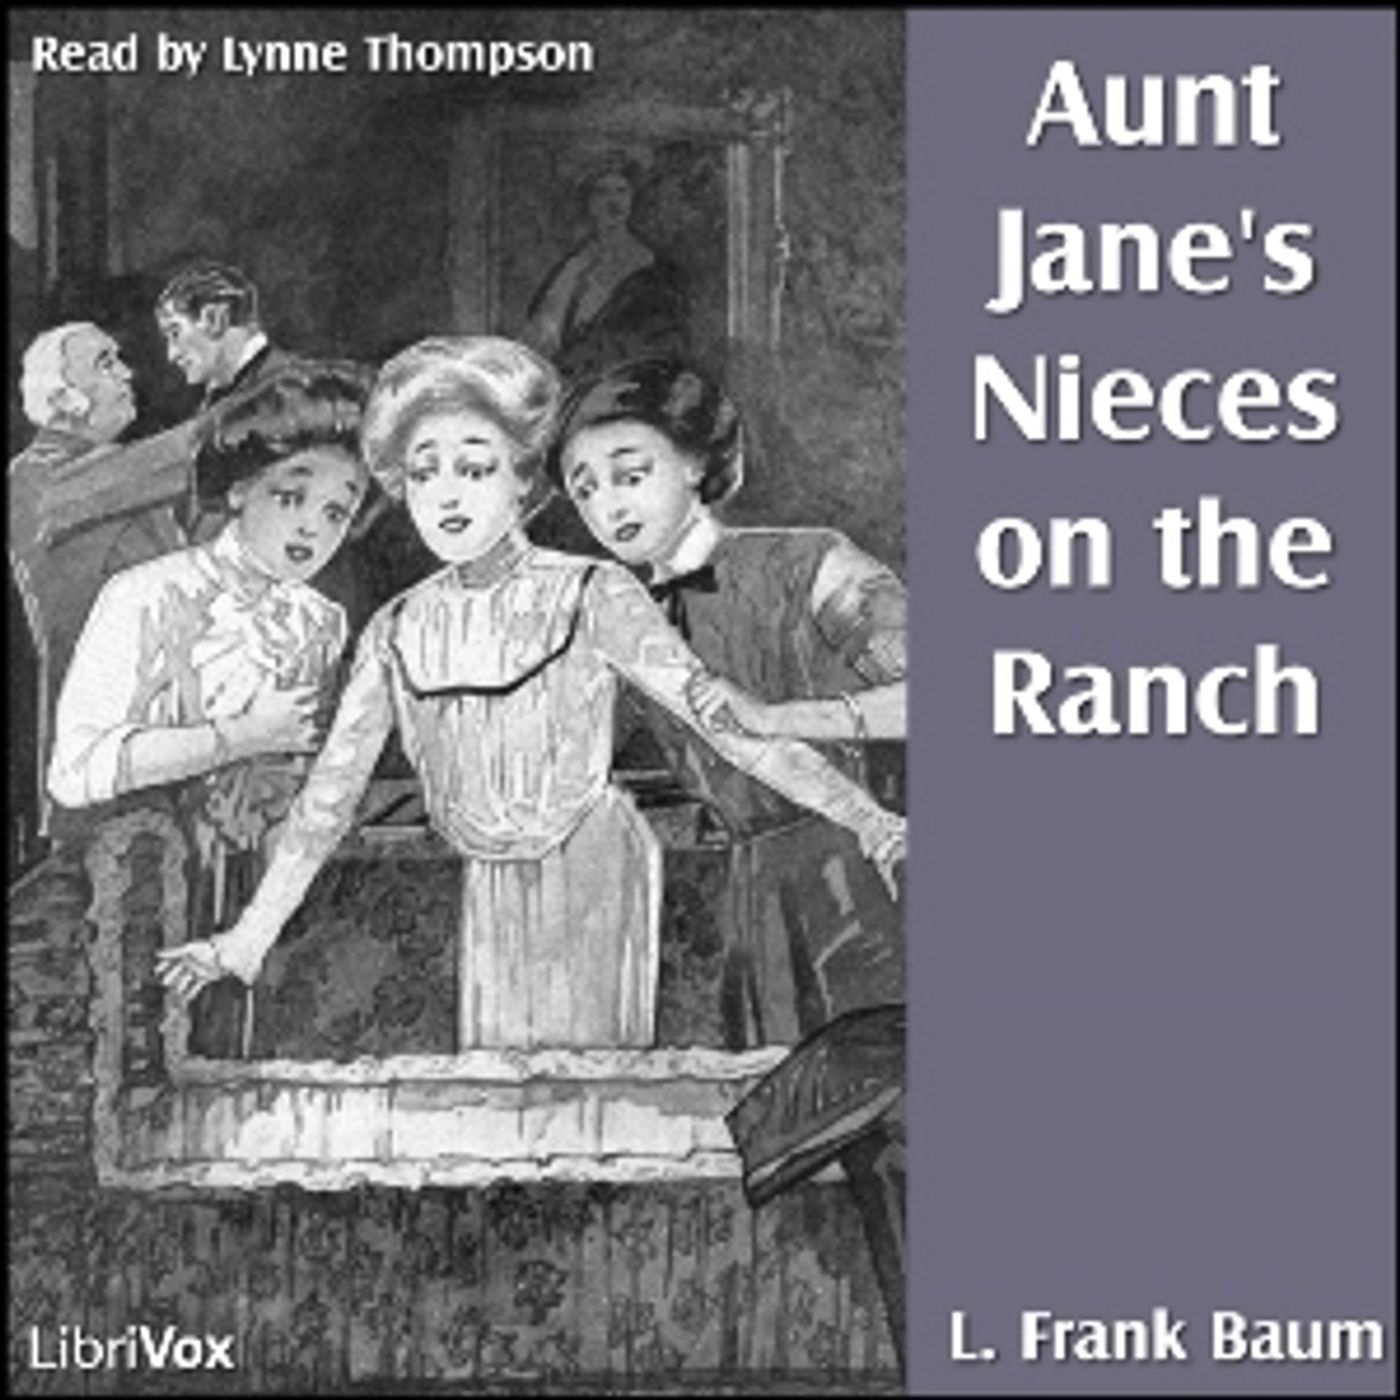 Aunt Jane’s Nieces On The Ranch by L. Frank Baum (1856 – 1919)